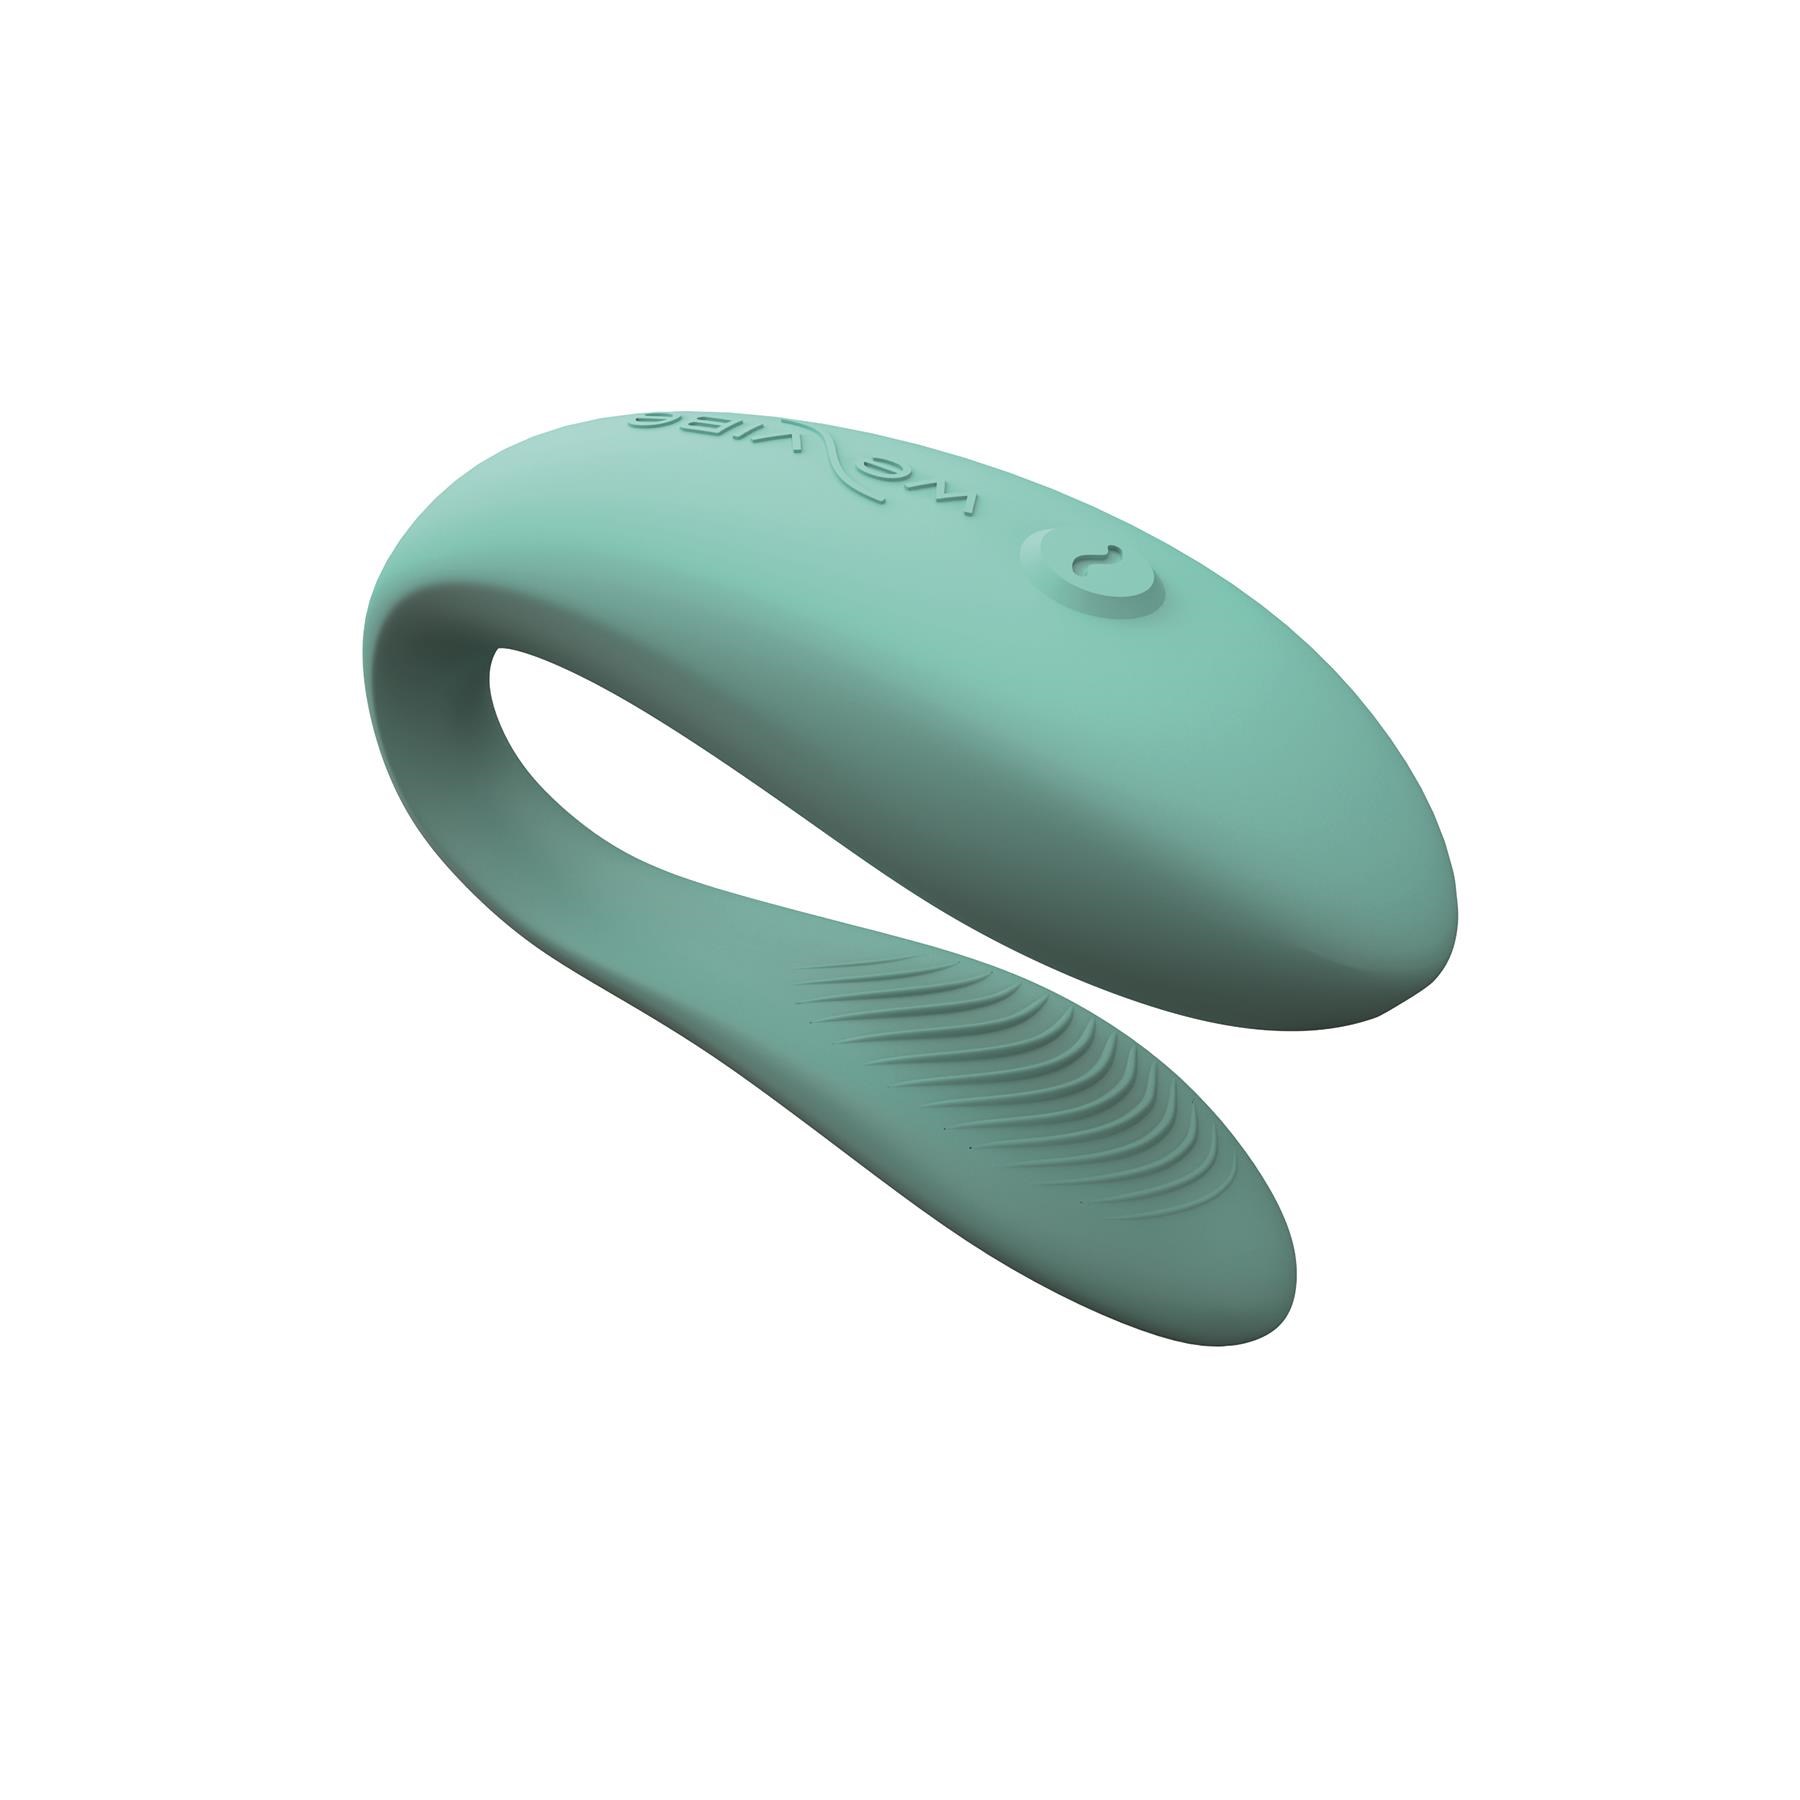 We-Vibe Sync Lite Couples Massager - Product Shot #5